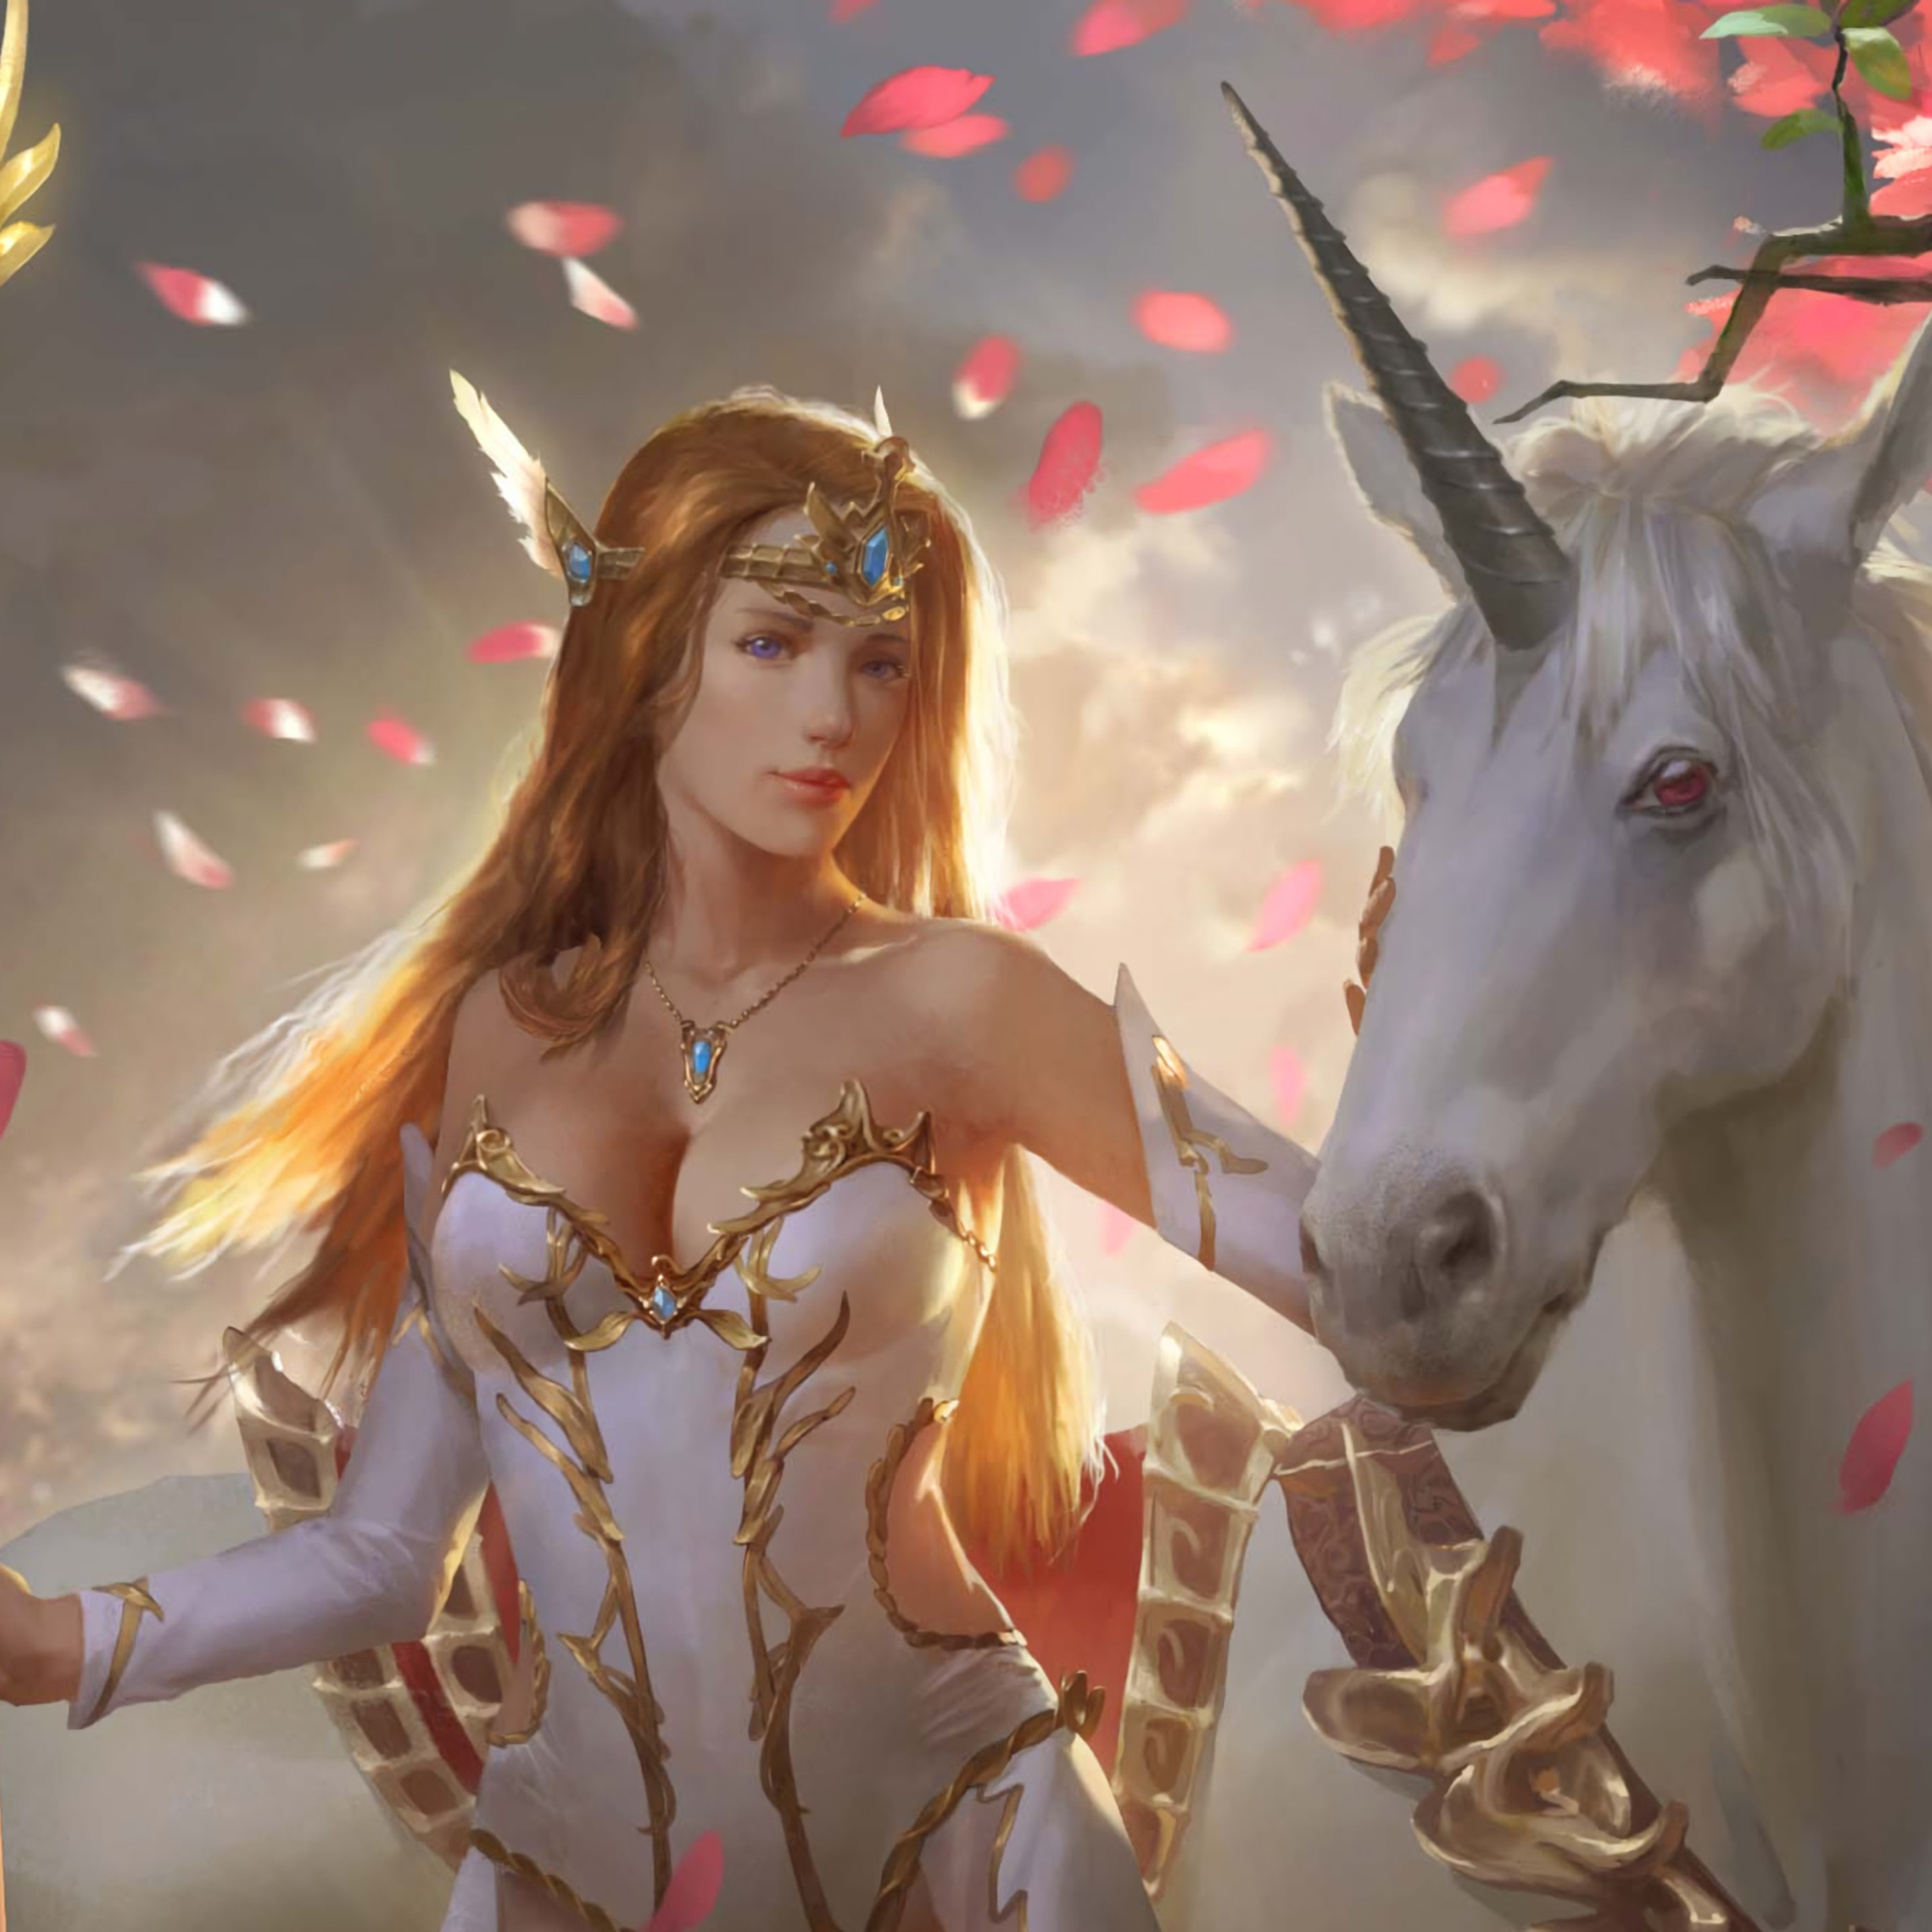 2932x2932 Fantasy Women With Unicorn Ipad Pro Retina Display Hd 4k Wallpapers Images Backgrounds Photos And Pictures